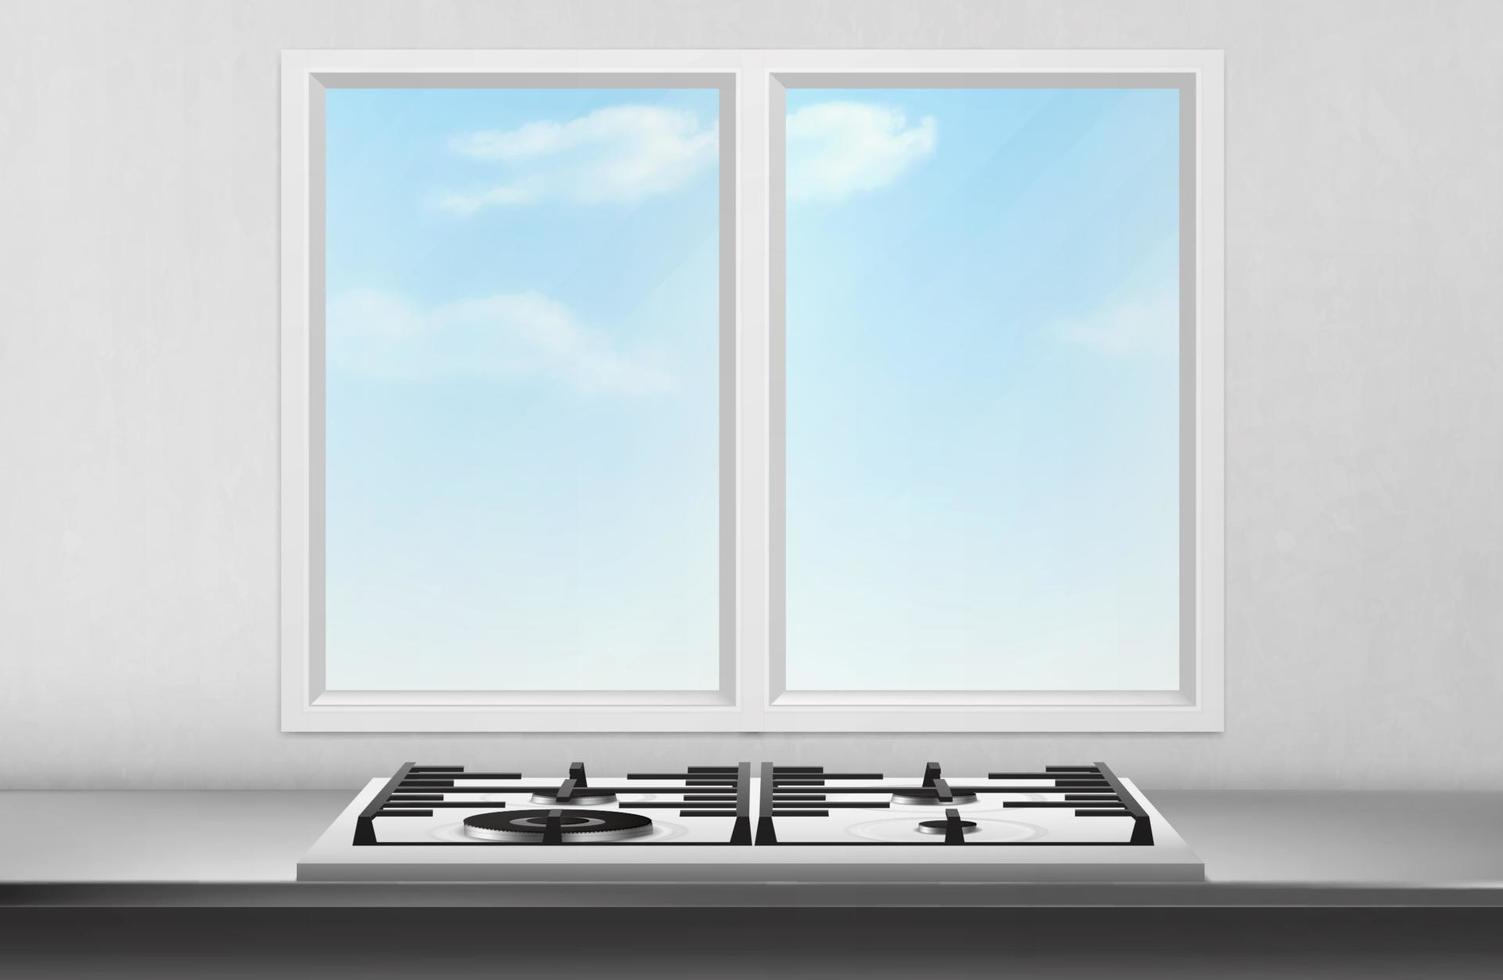 Gas and electric stove front of kitchen window vector